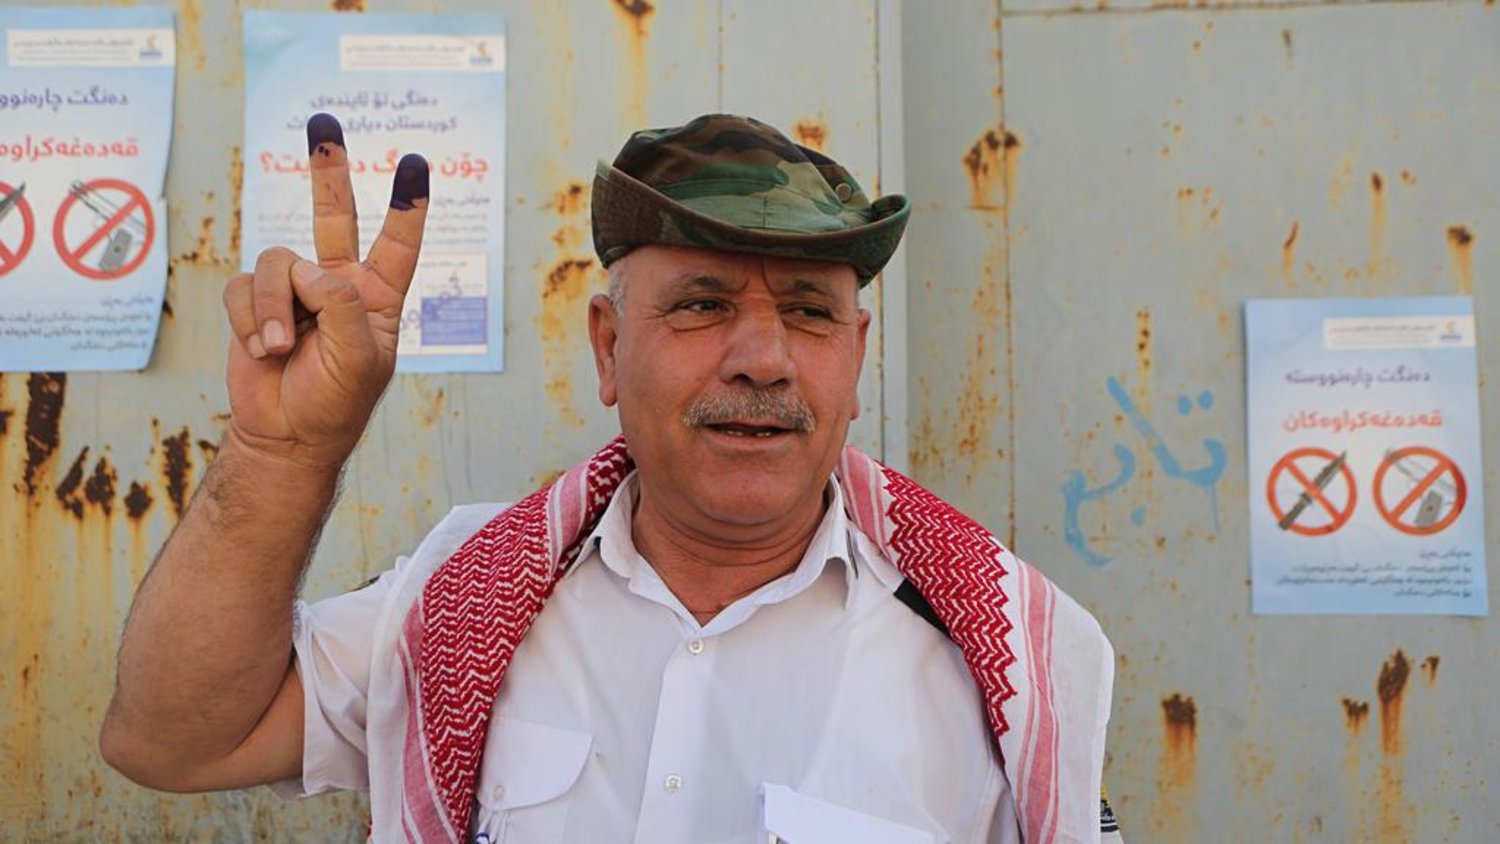  An Iraqi Kurdish man poses with his inked fingers after casting a vote during the referendum on independence from Iraq in Irbil on September 25, 2017. Khalid Mohammed / AP